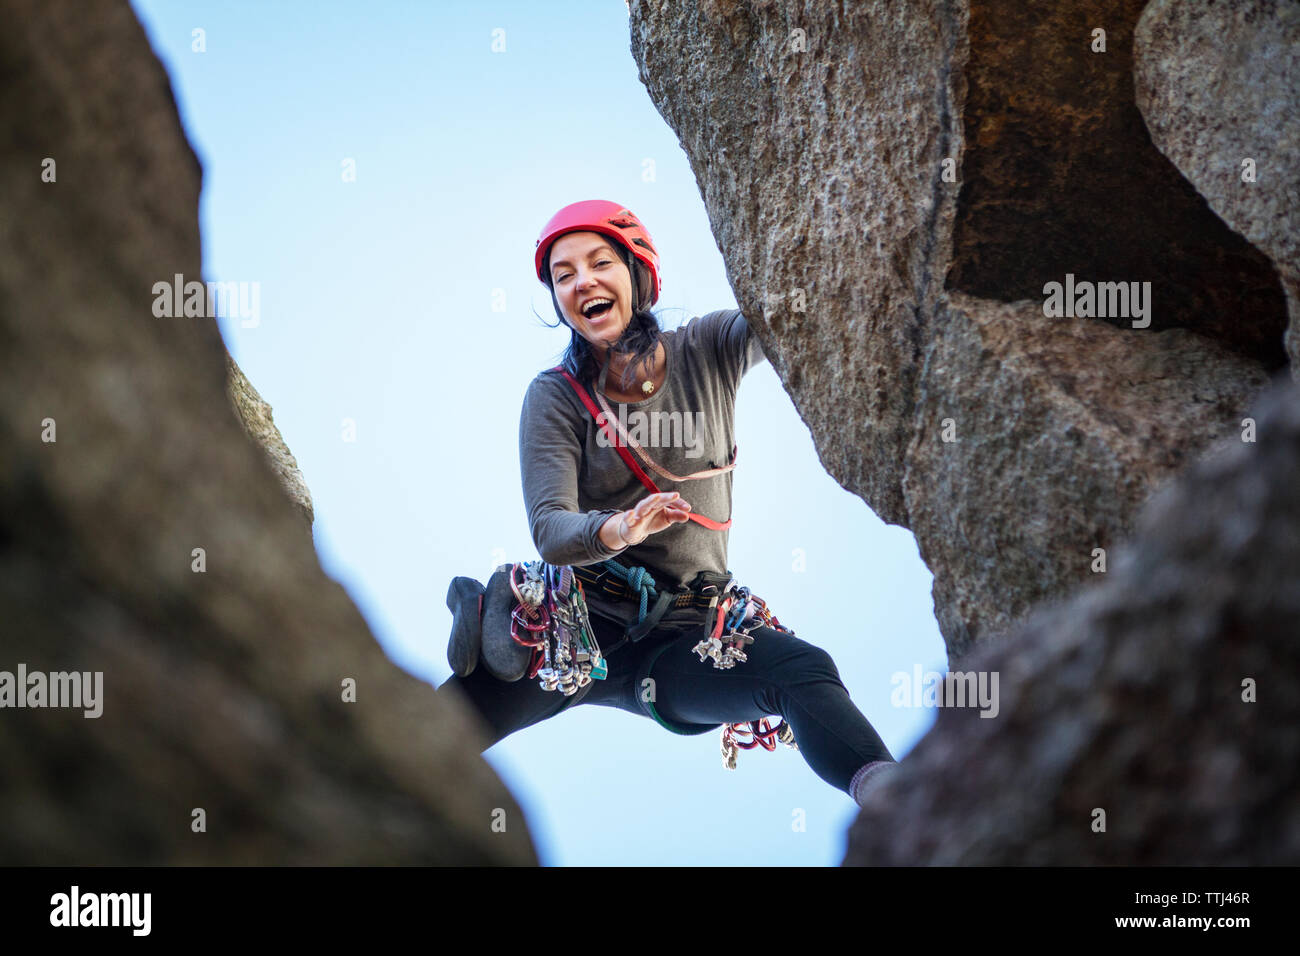 Low angle view of happy woman rock climbing Stock Photo